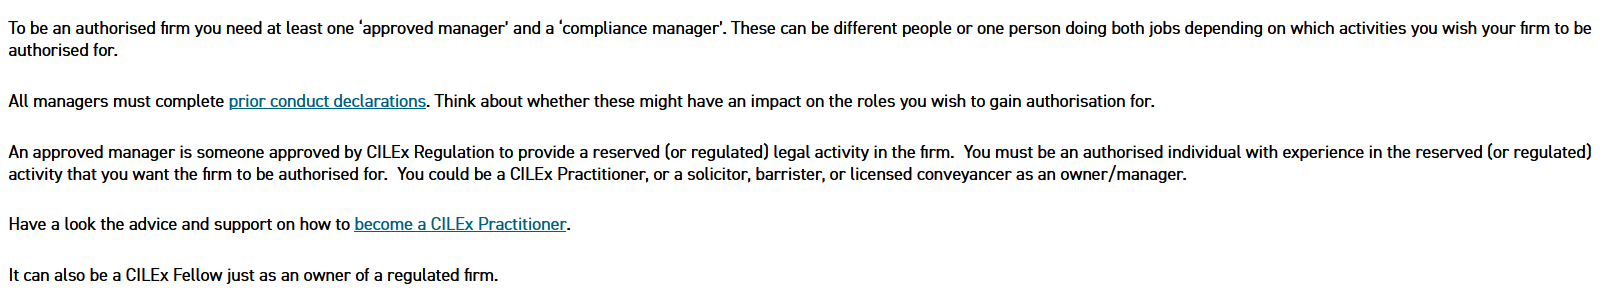 The requirements to be an authorised manager